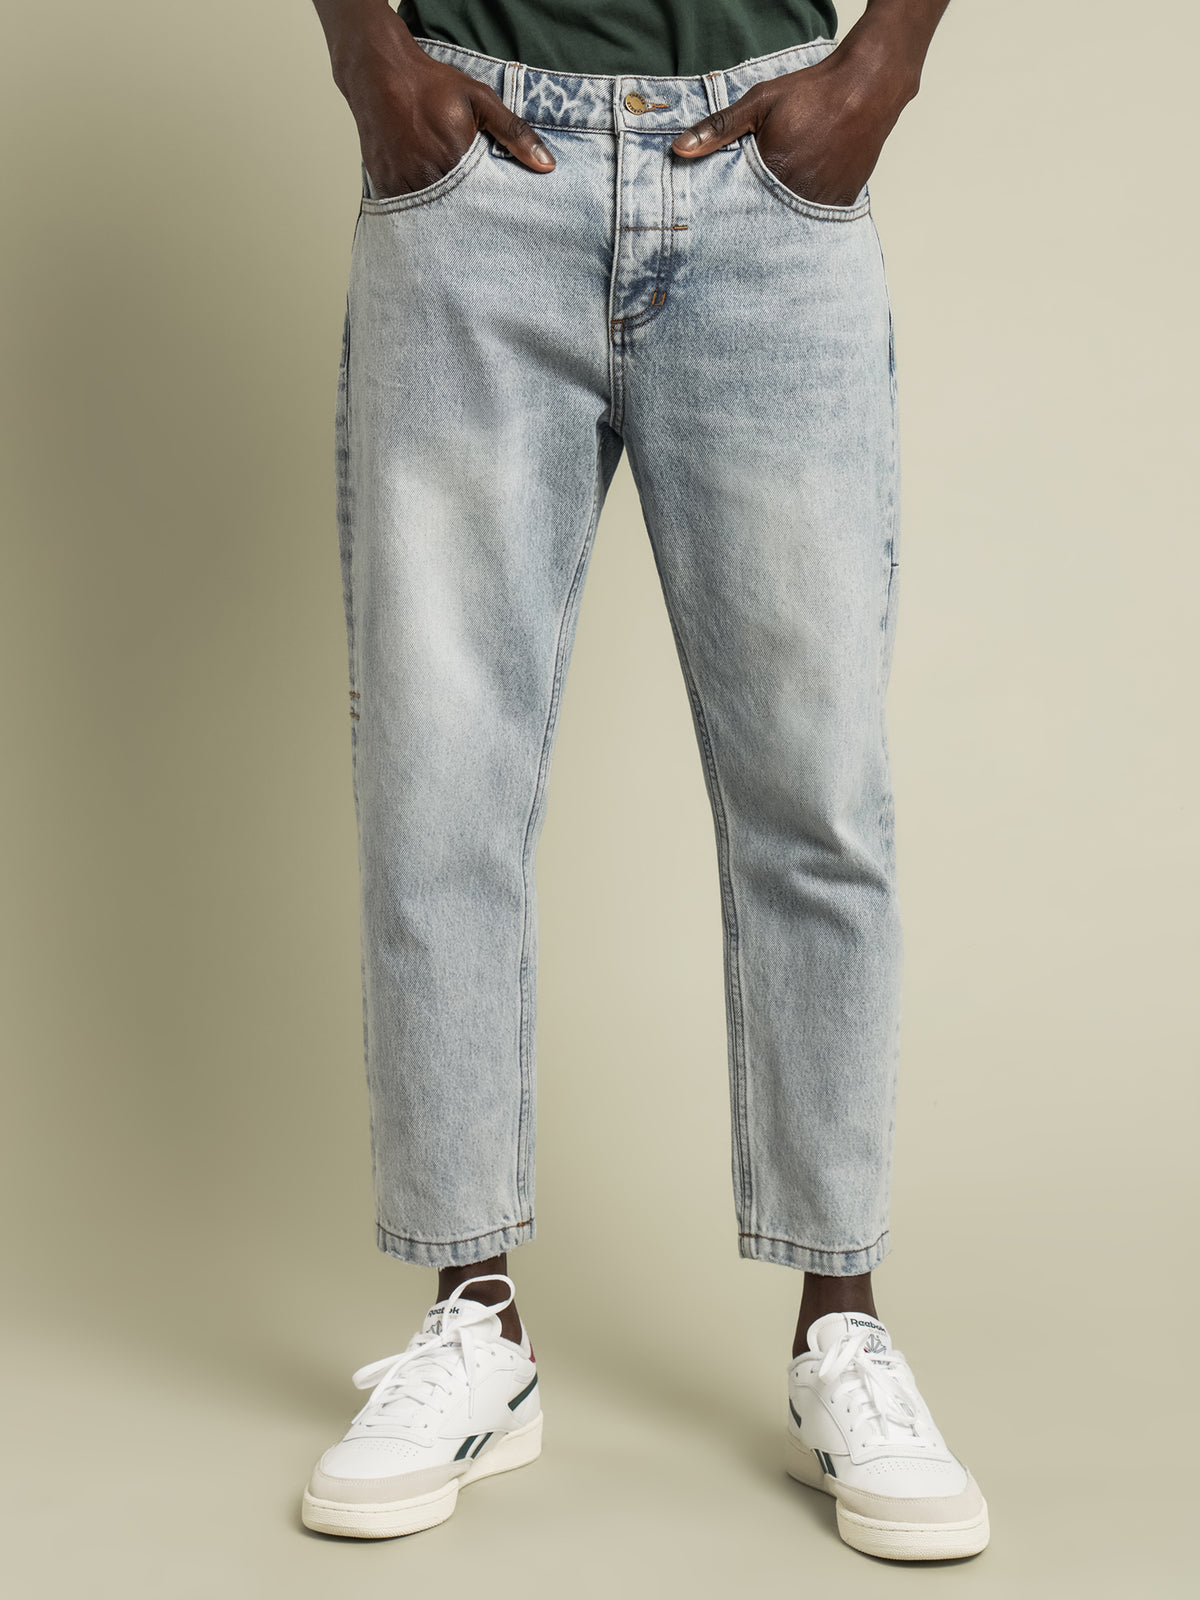 Chopped Jeans in Time Worn Blue